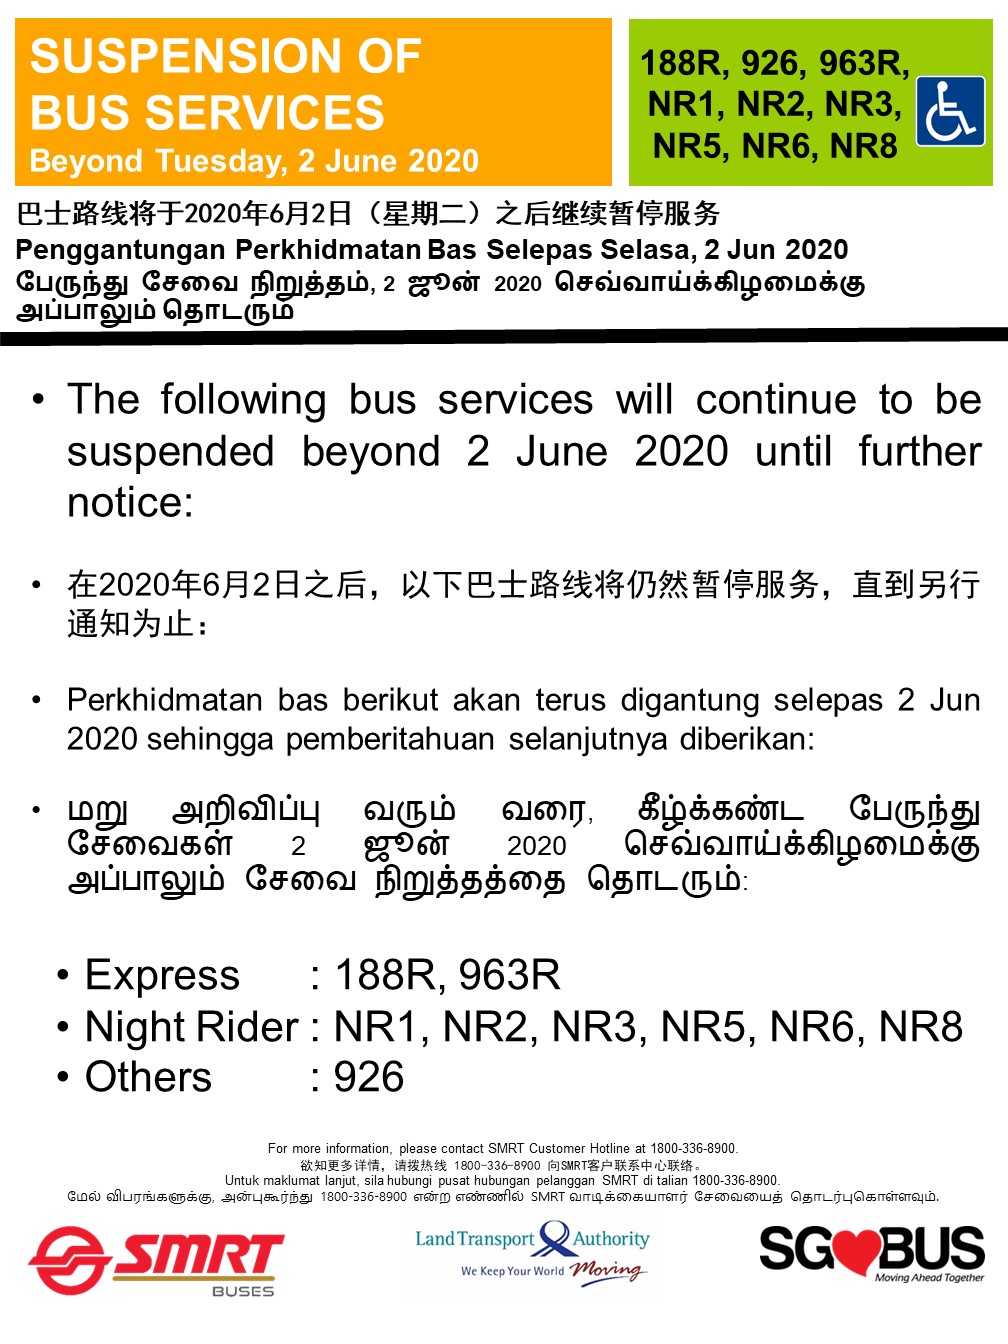 Official announcement from SMRT Buses on temporary suspension of selected bus services until further notice.